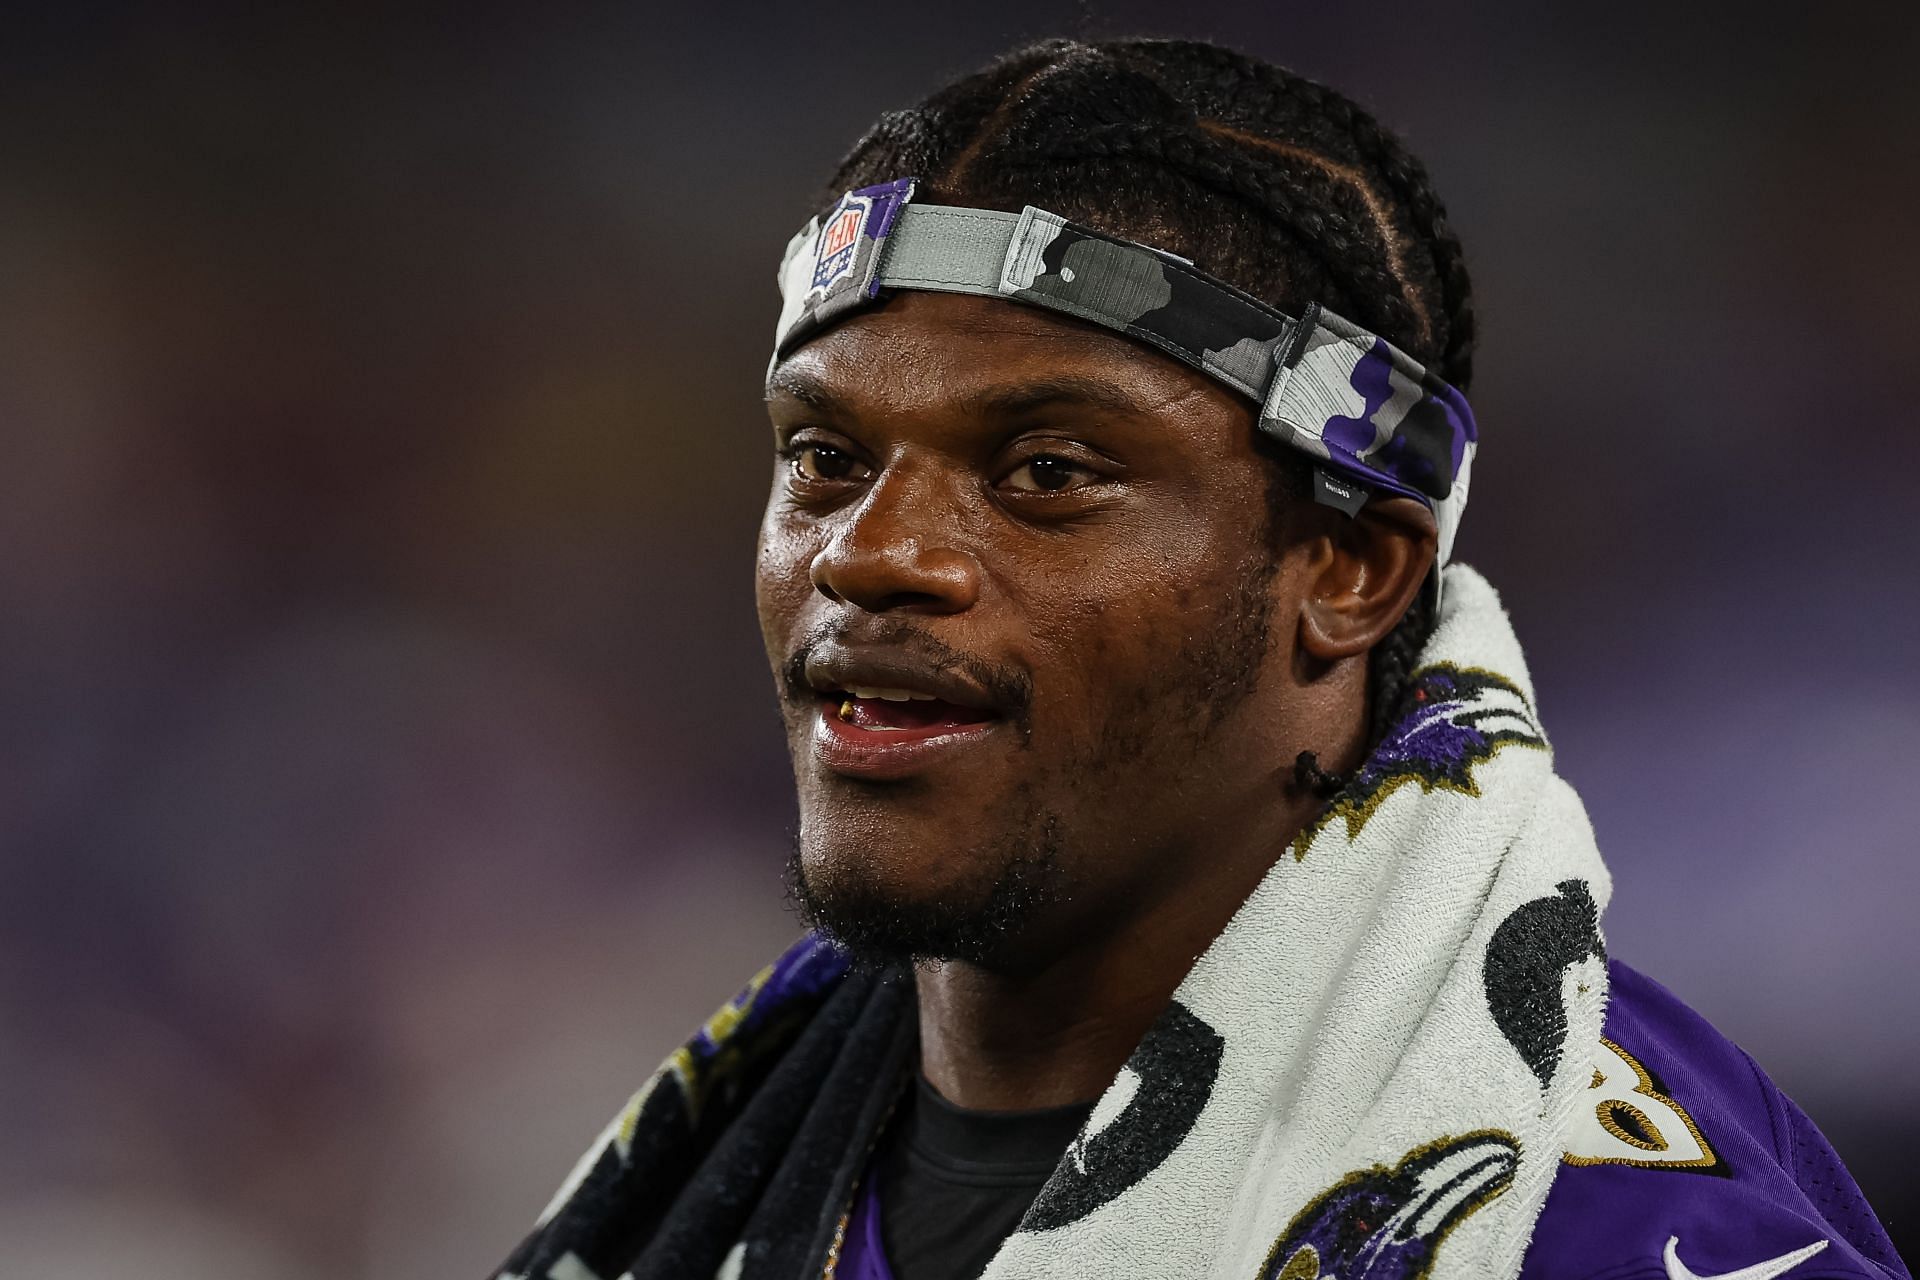 NFL analyst predicts Lamar Jackson will become the second-highest paid